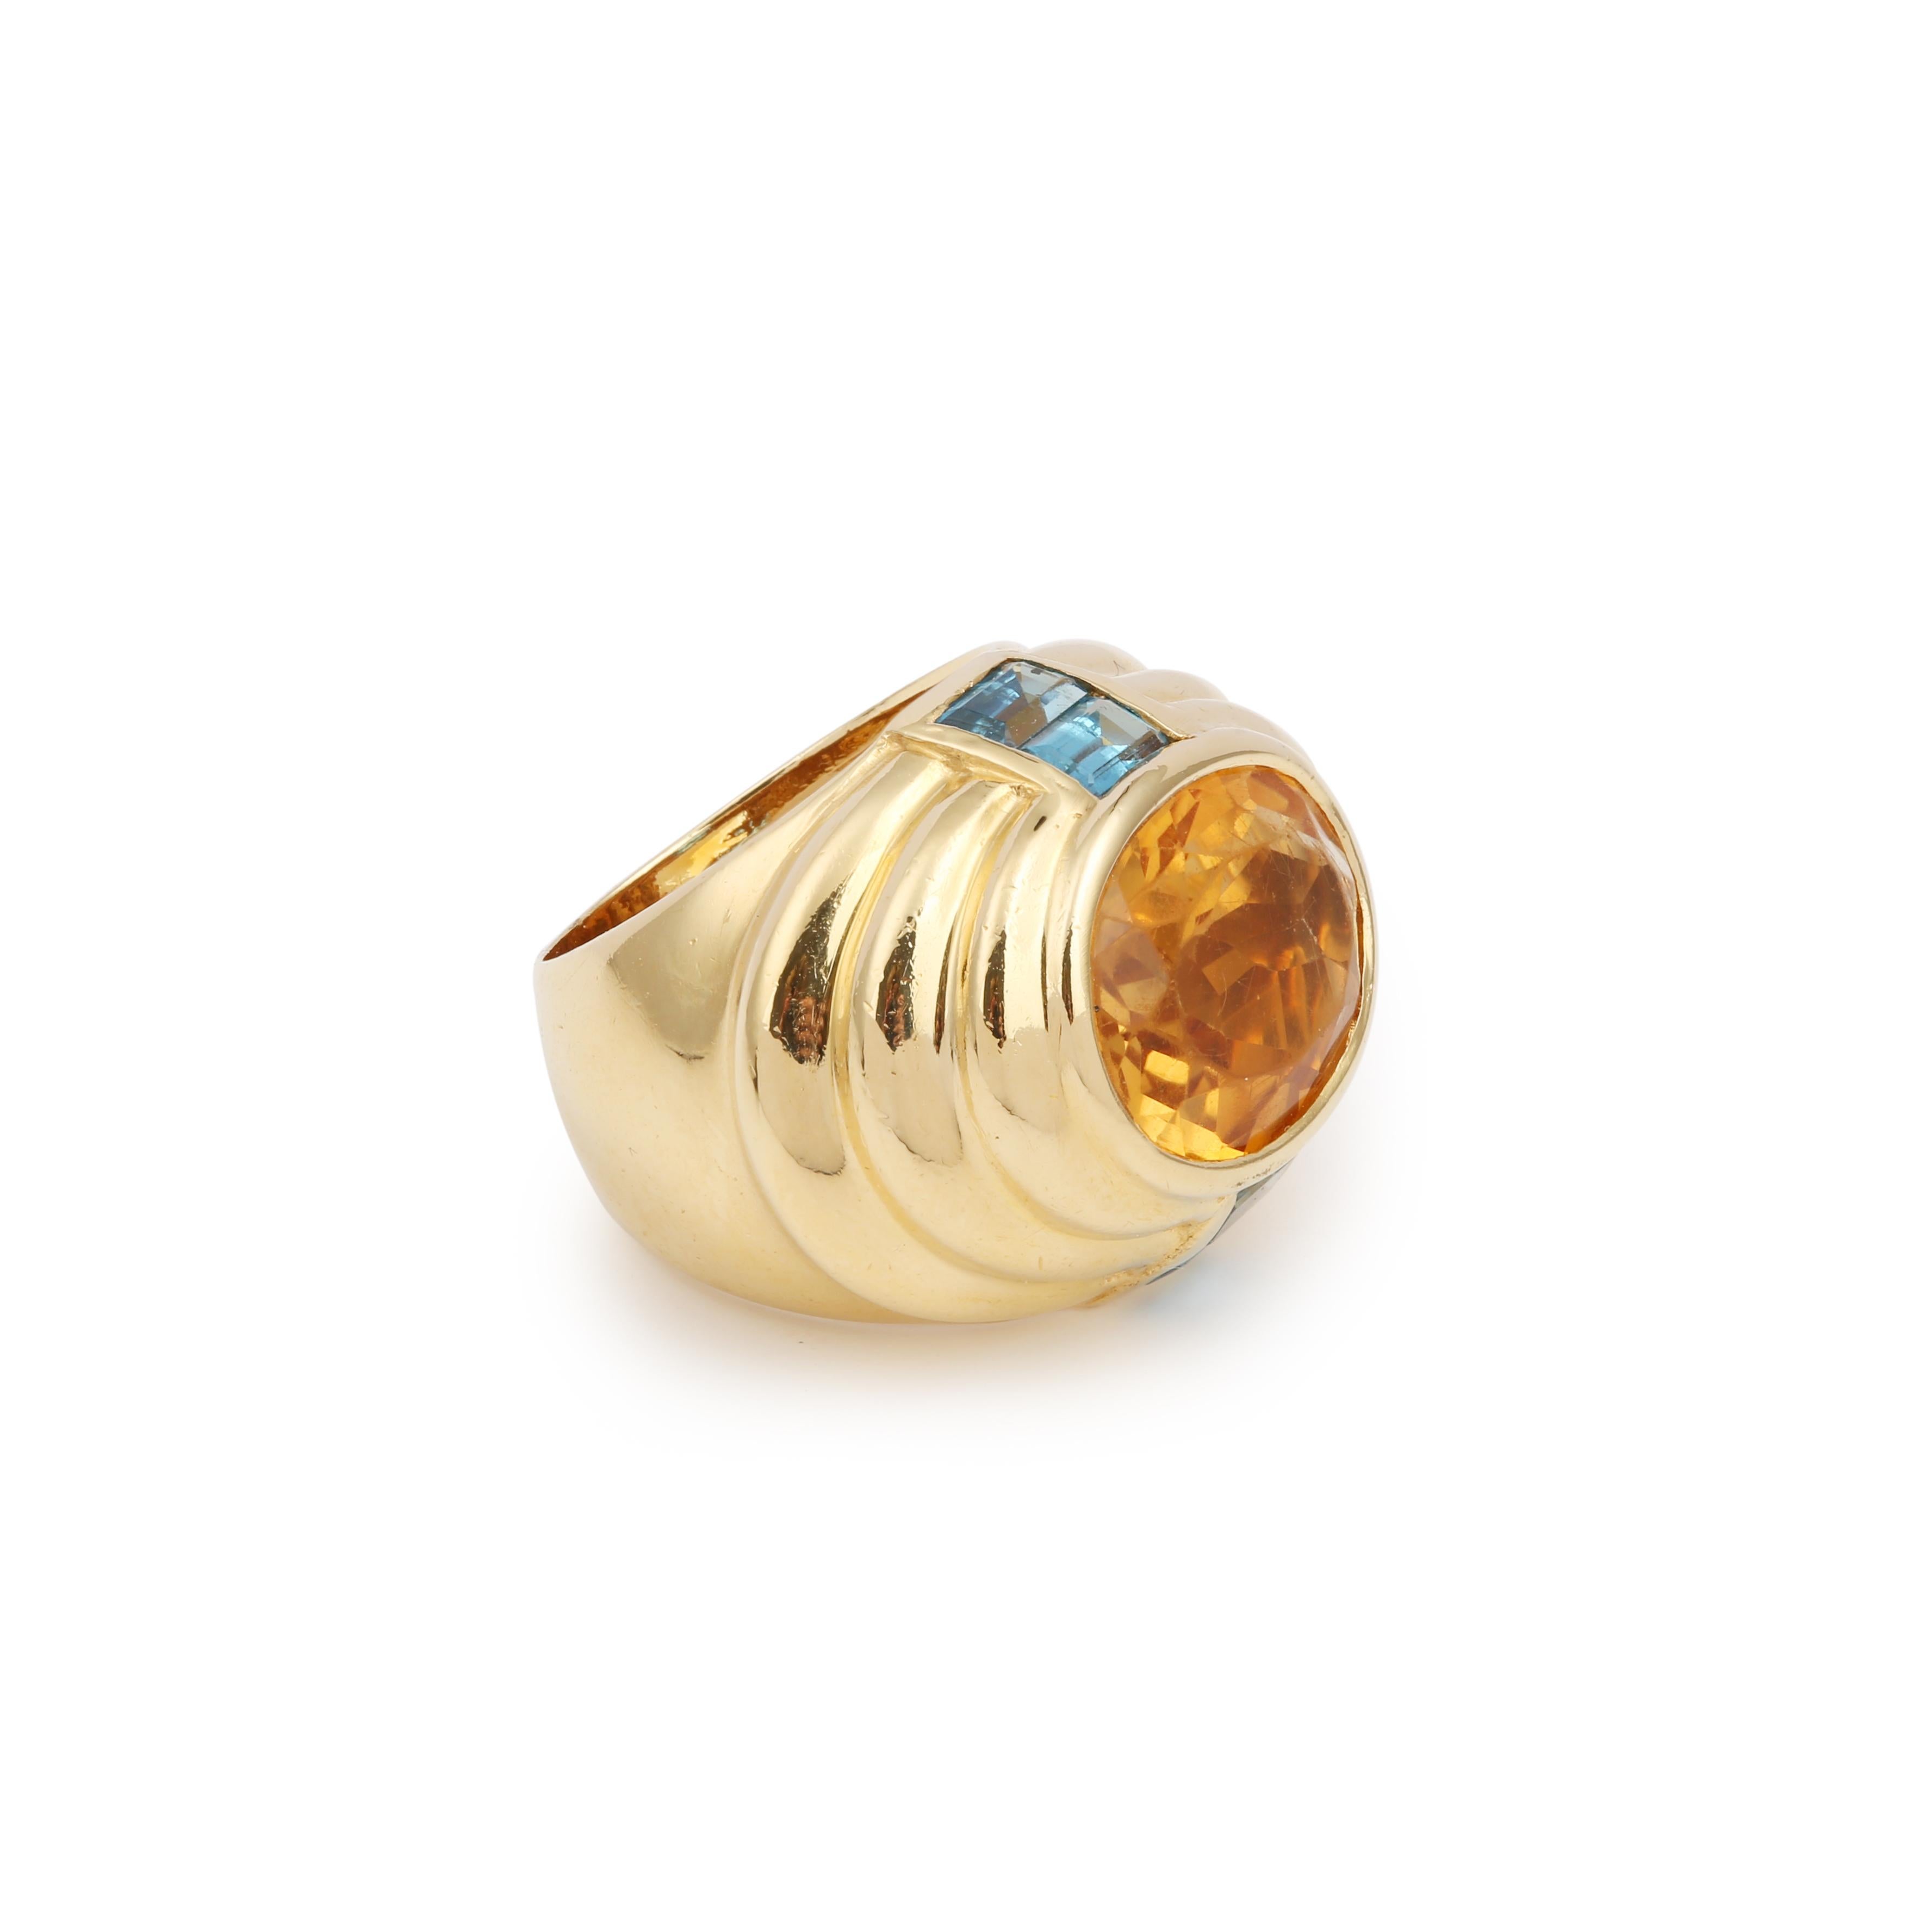 Vintage Fred cocktail ring with gadroons, centred on an oval-cut citrine and set on either side with four rectangular topazes.

Signed Fred and hallmarked 750 (Signature slightly faded due to an old cut)

Estimated citrine weight: 6 carats

Slight